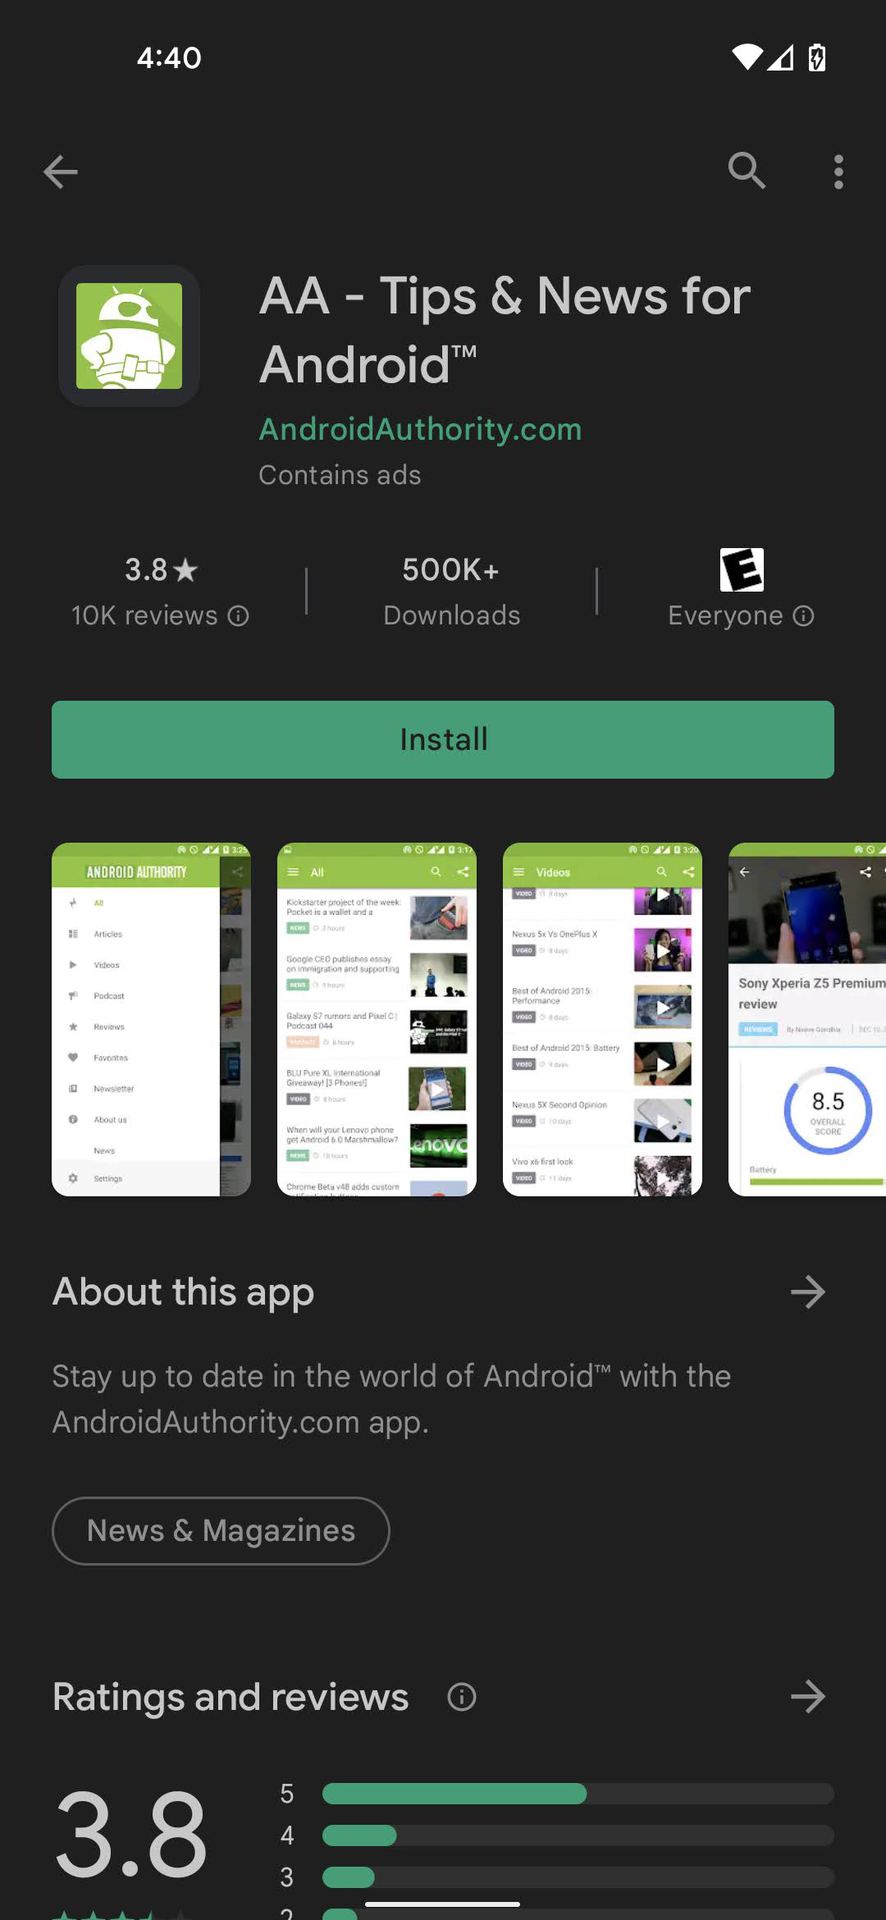 Download apps from Google Play Store 2